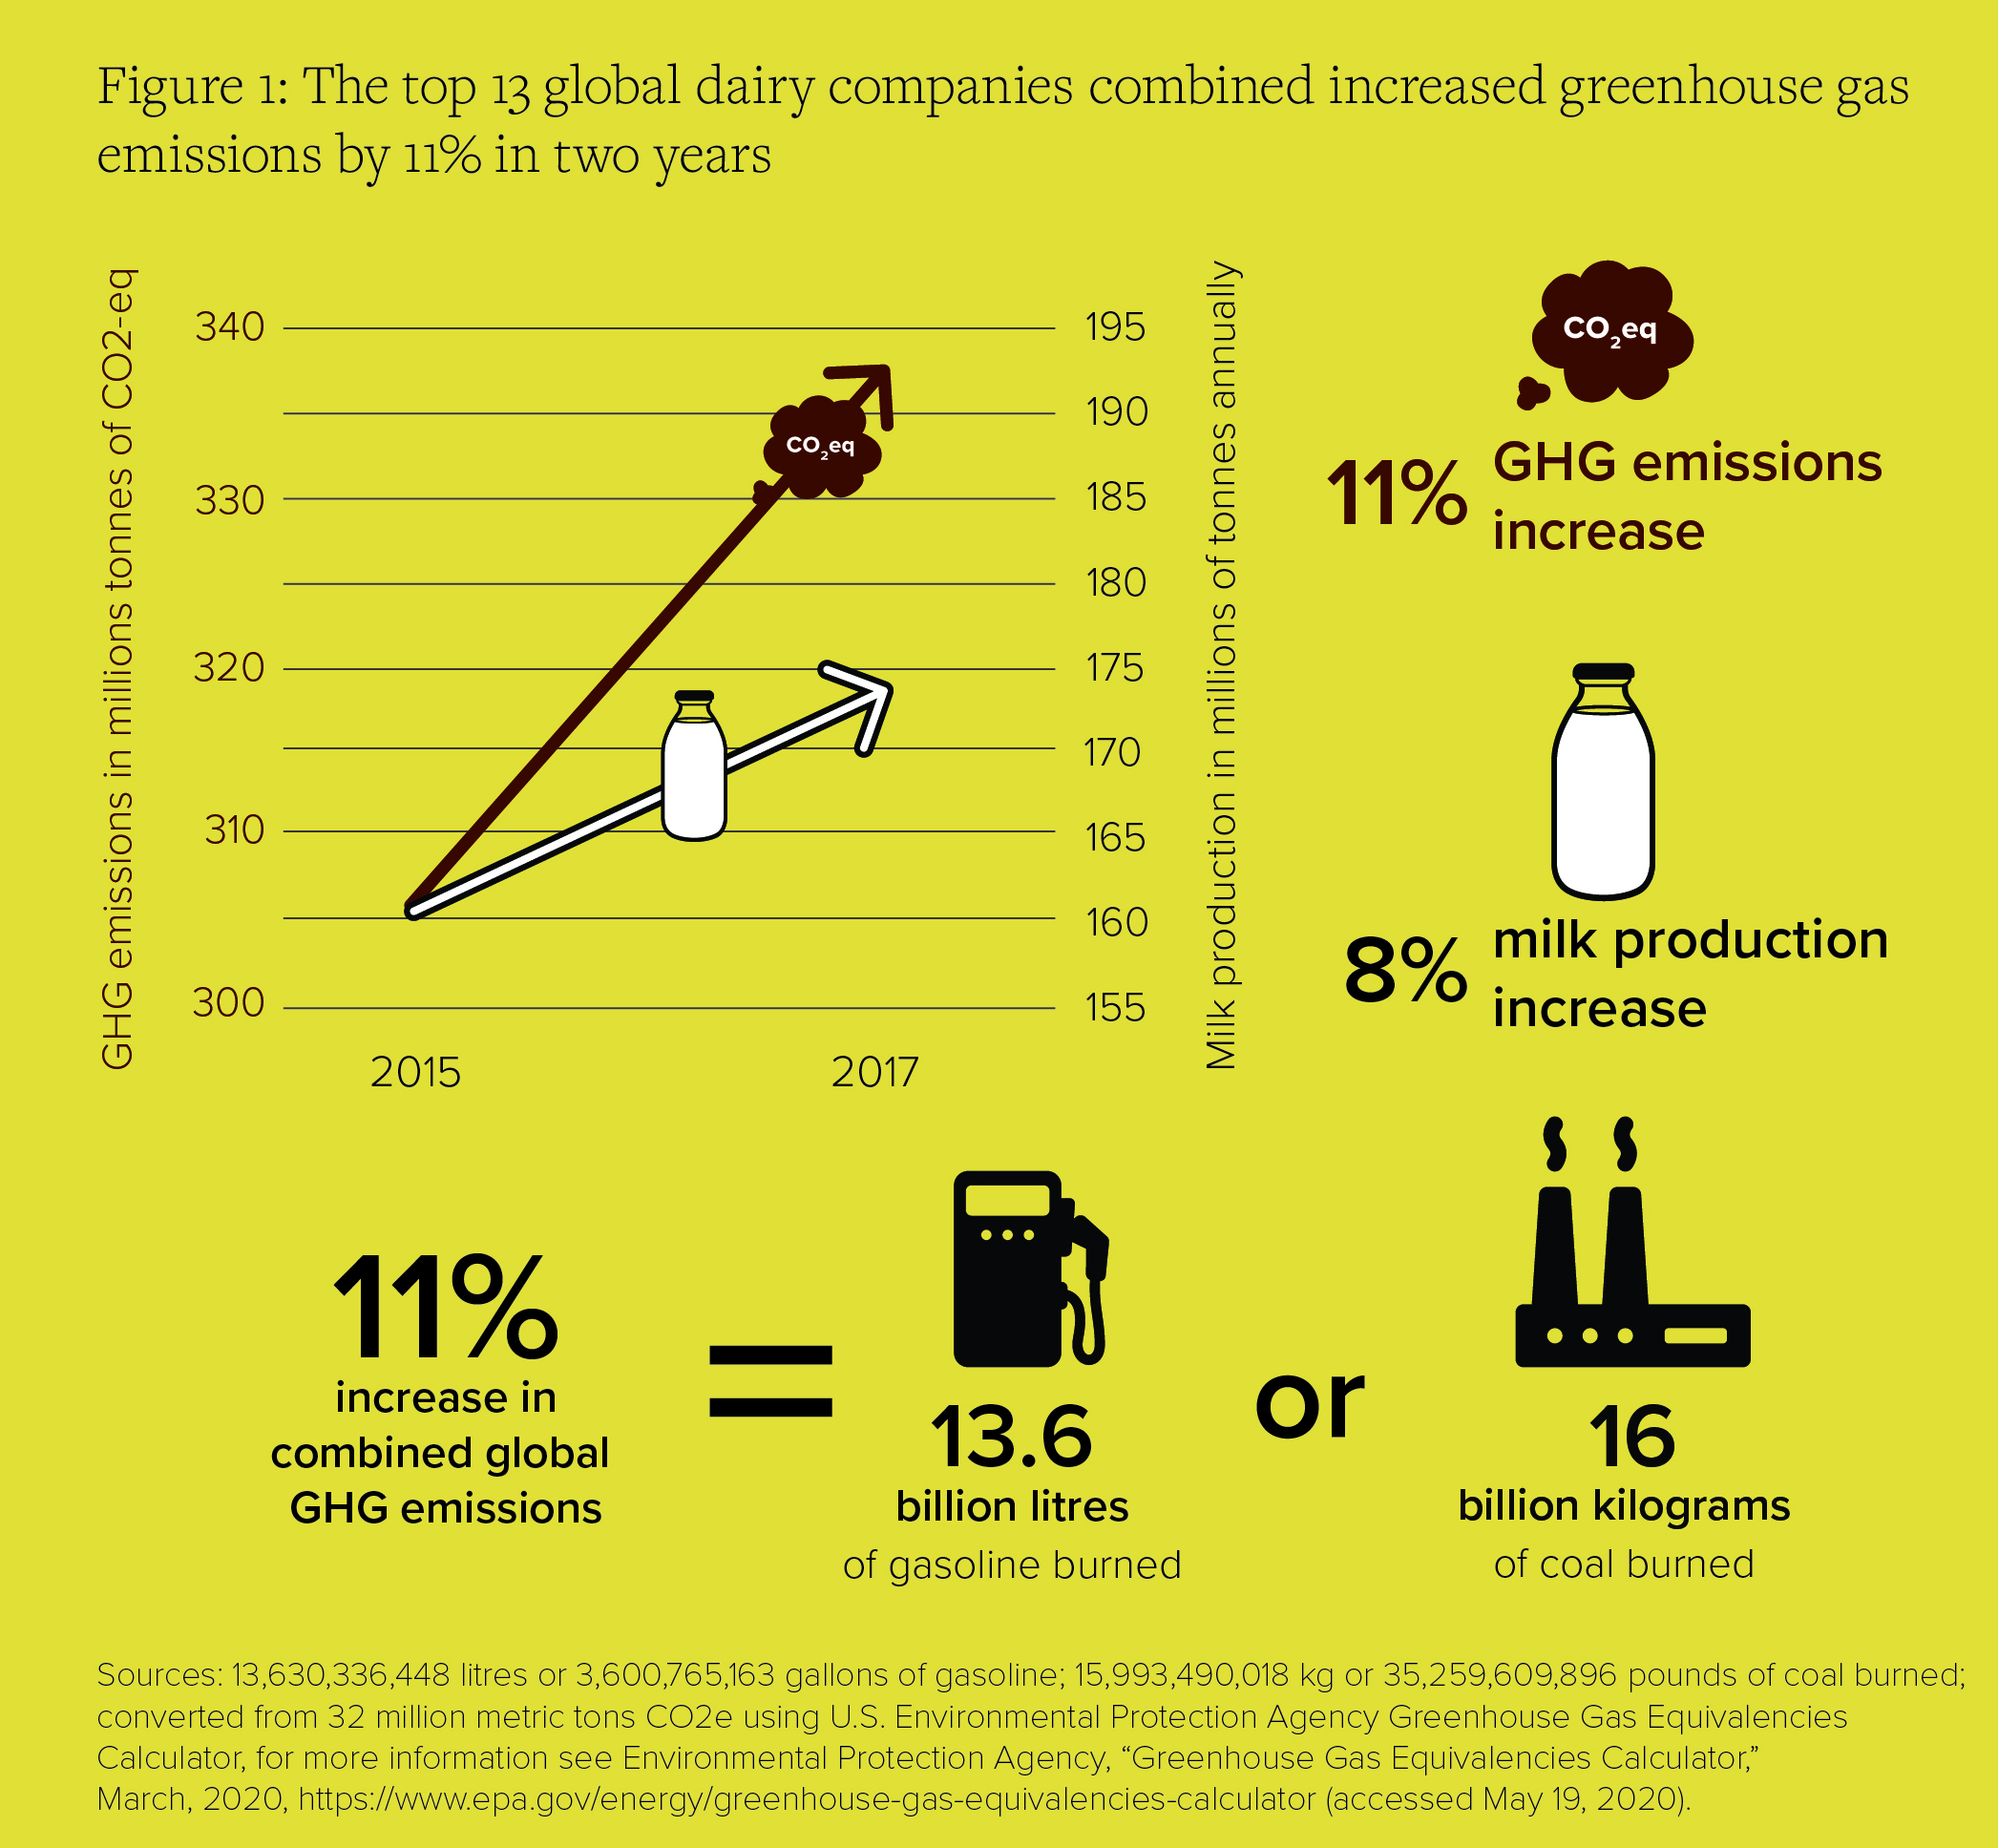 Figure 1: The top 13 global dairy companies combined increased greenhouse gas emissions by 11% in two years